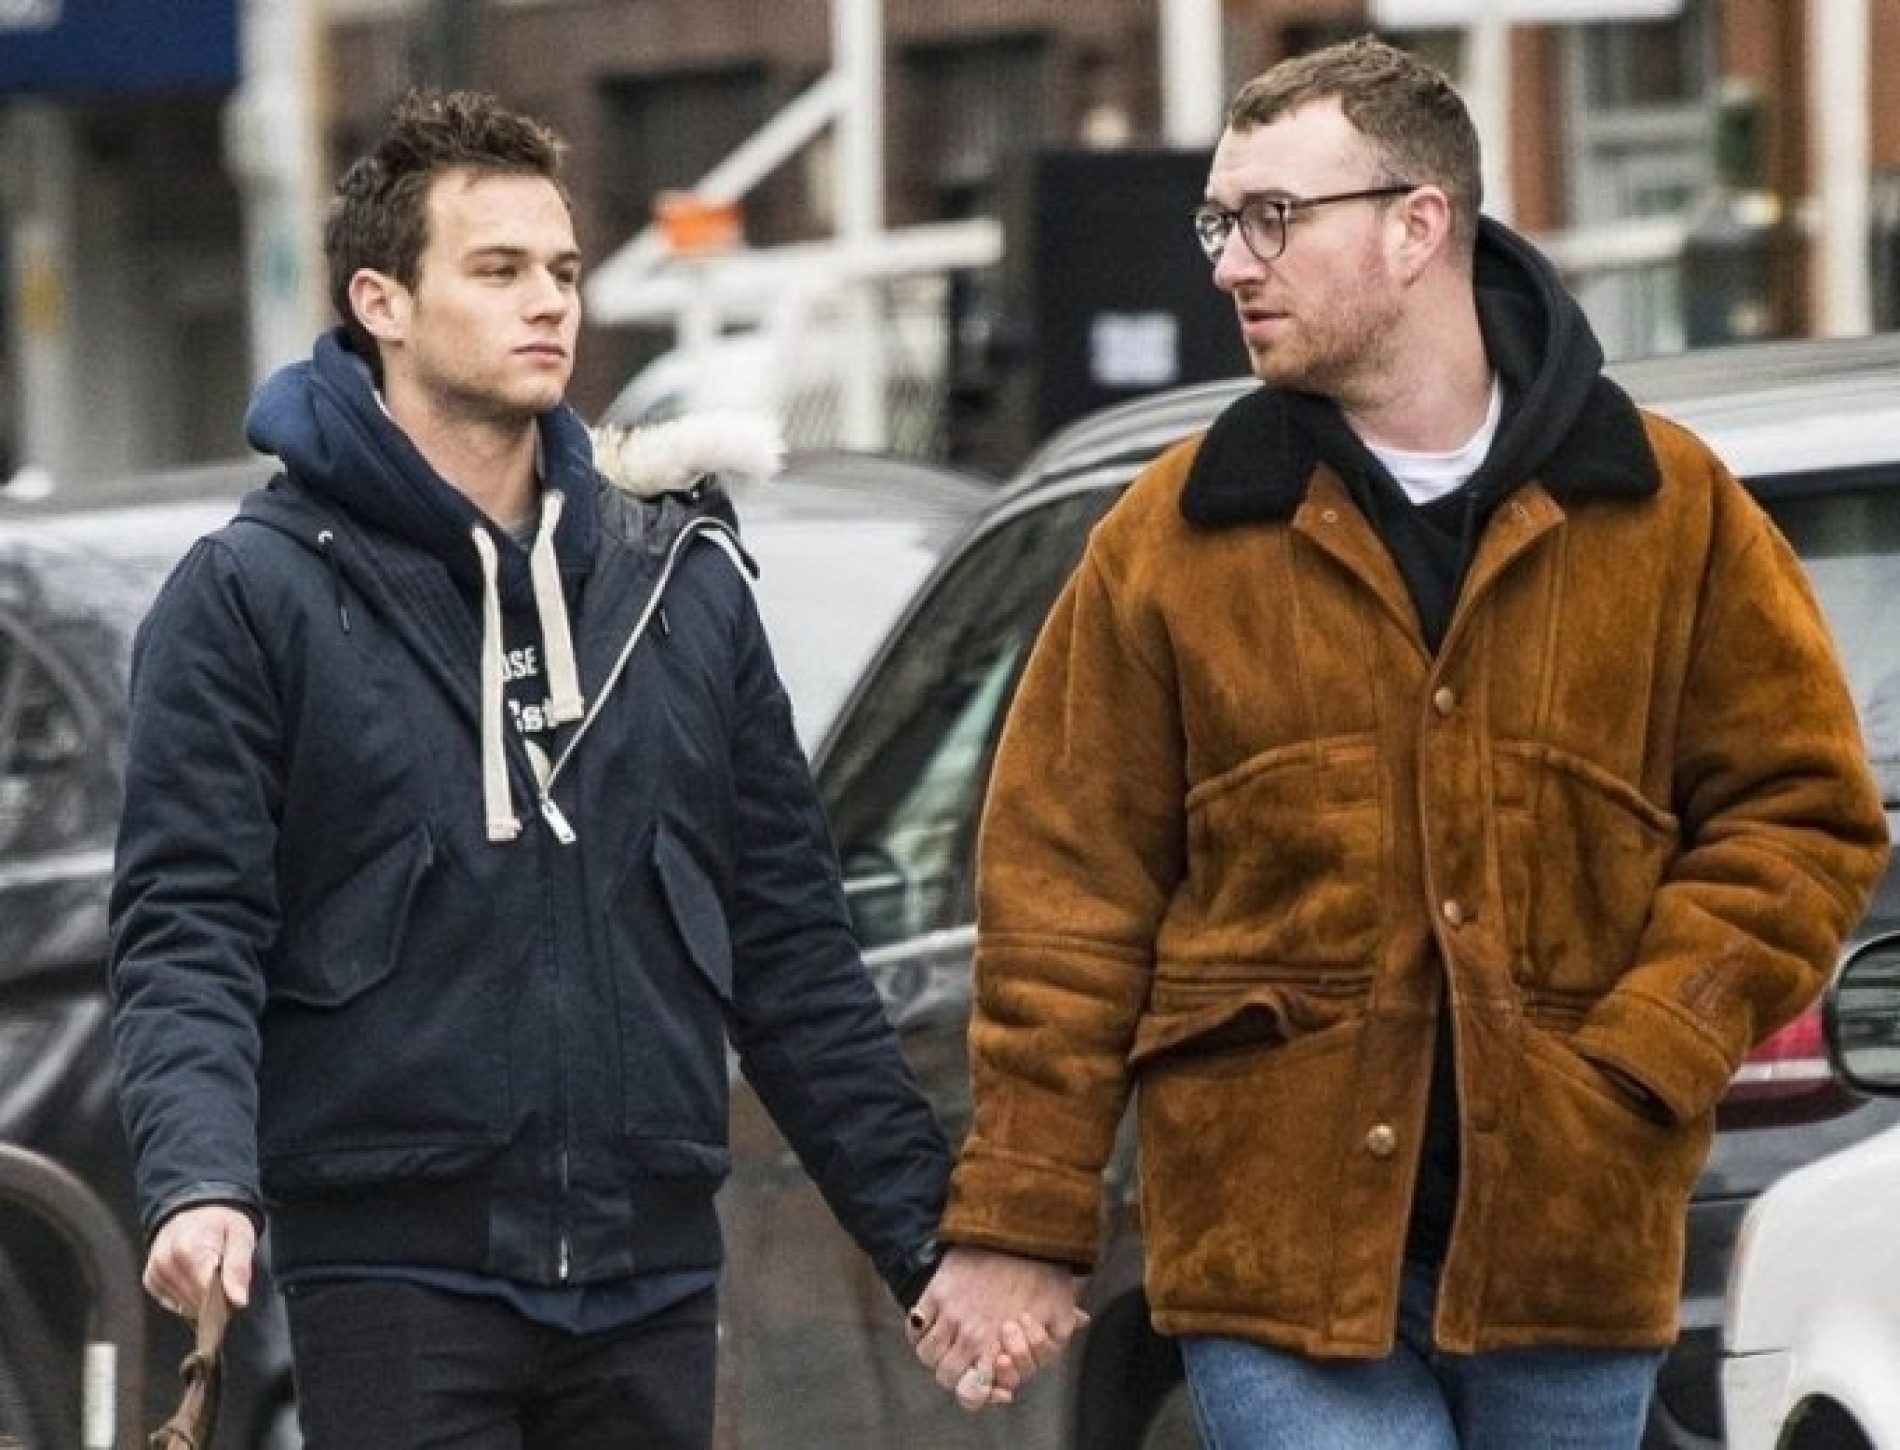 Sam Smith split from Brandon Flynn after nine months together, admits he’s having a tough time post breakup